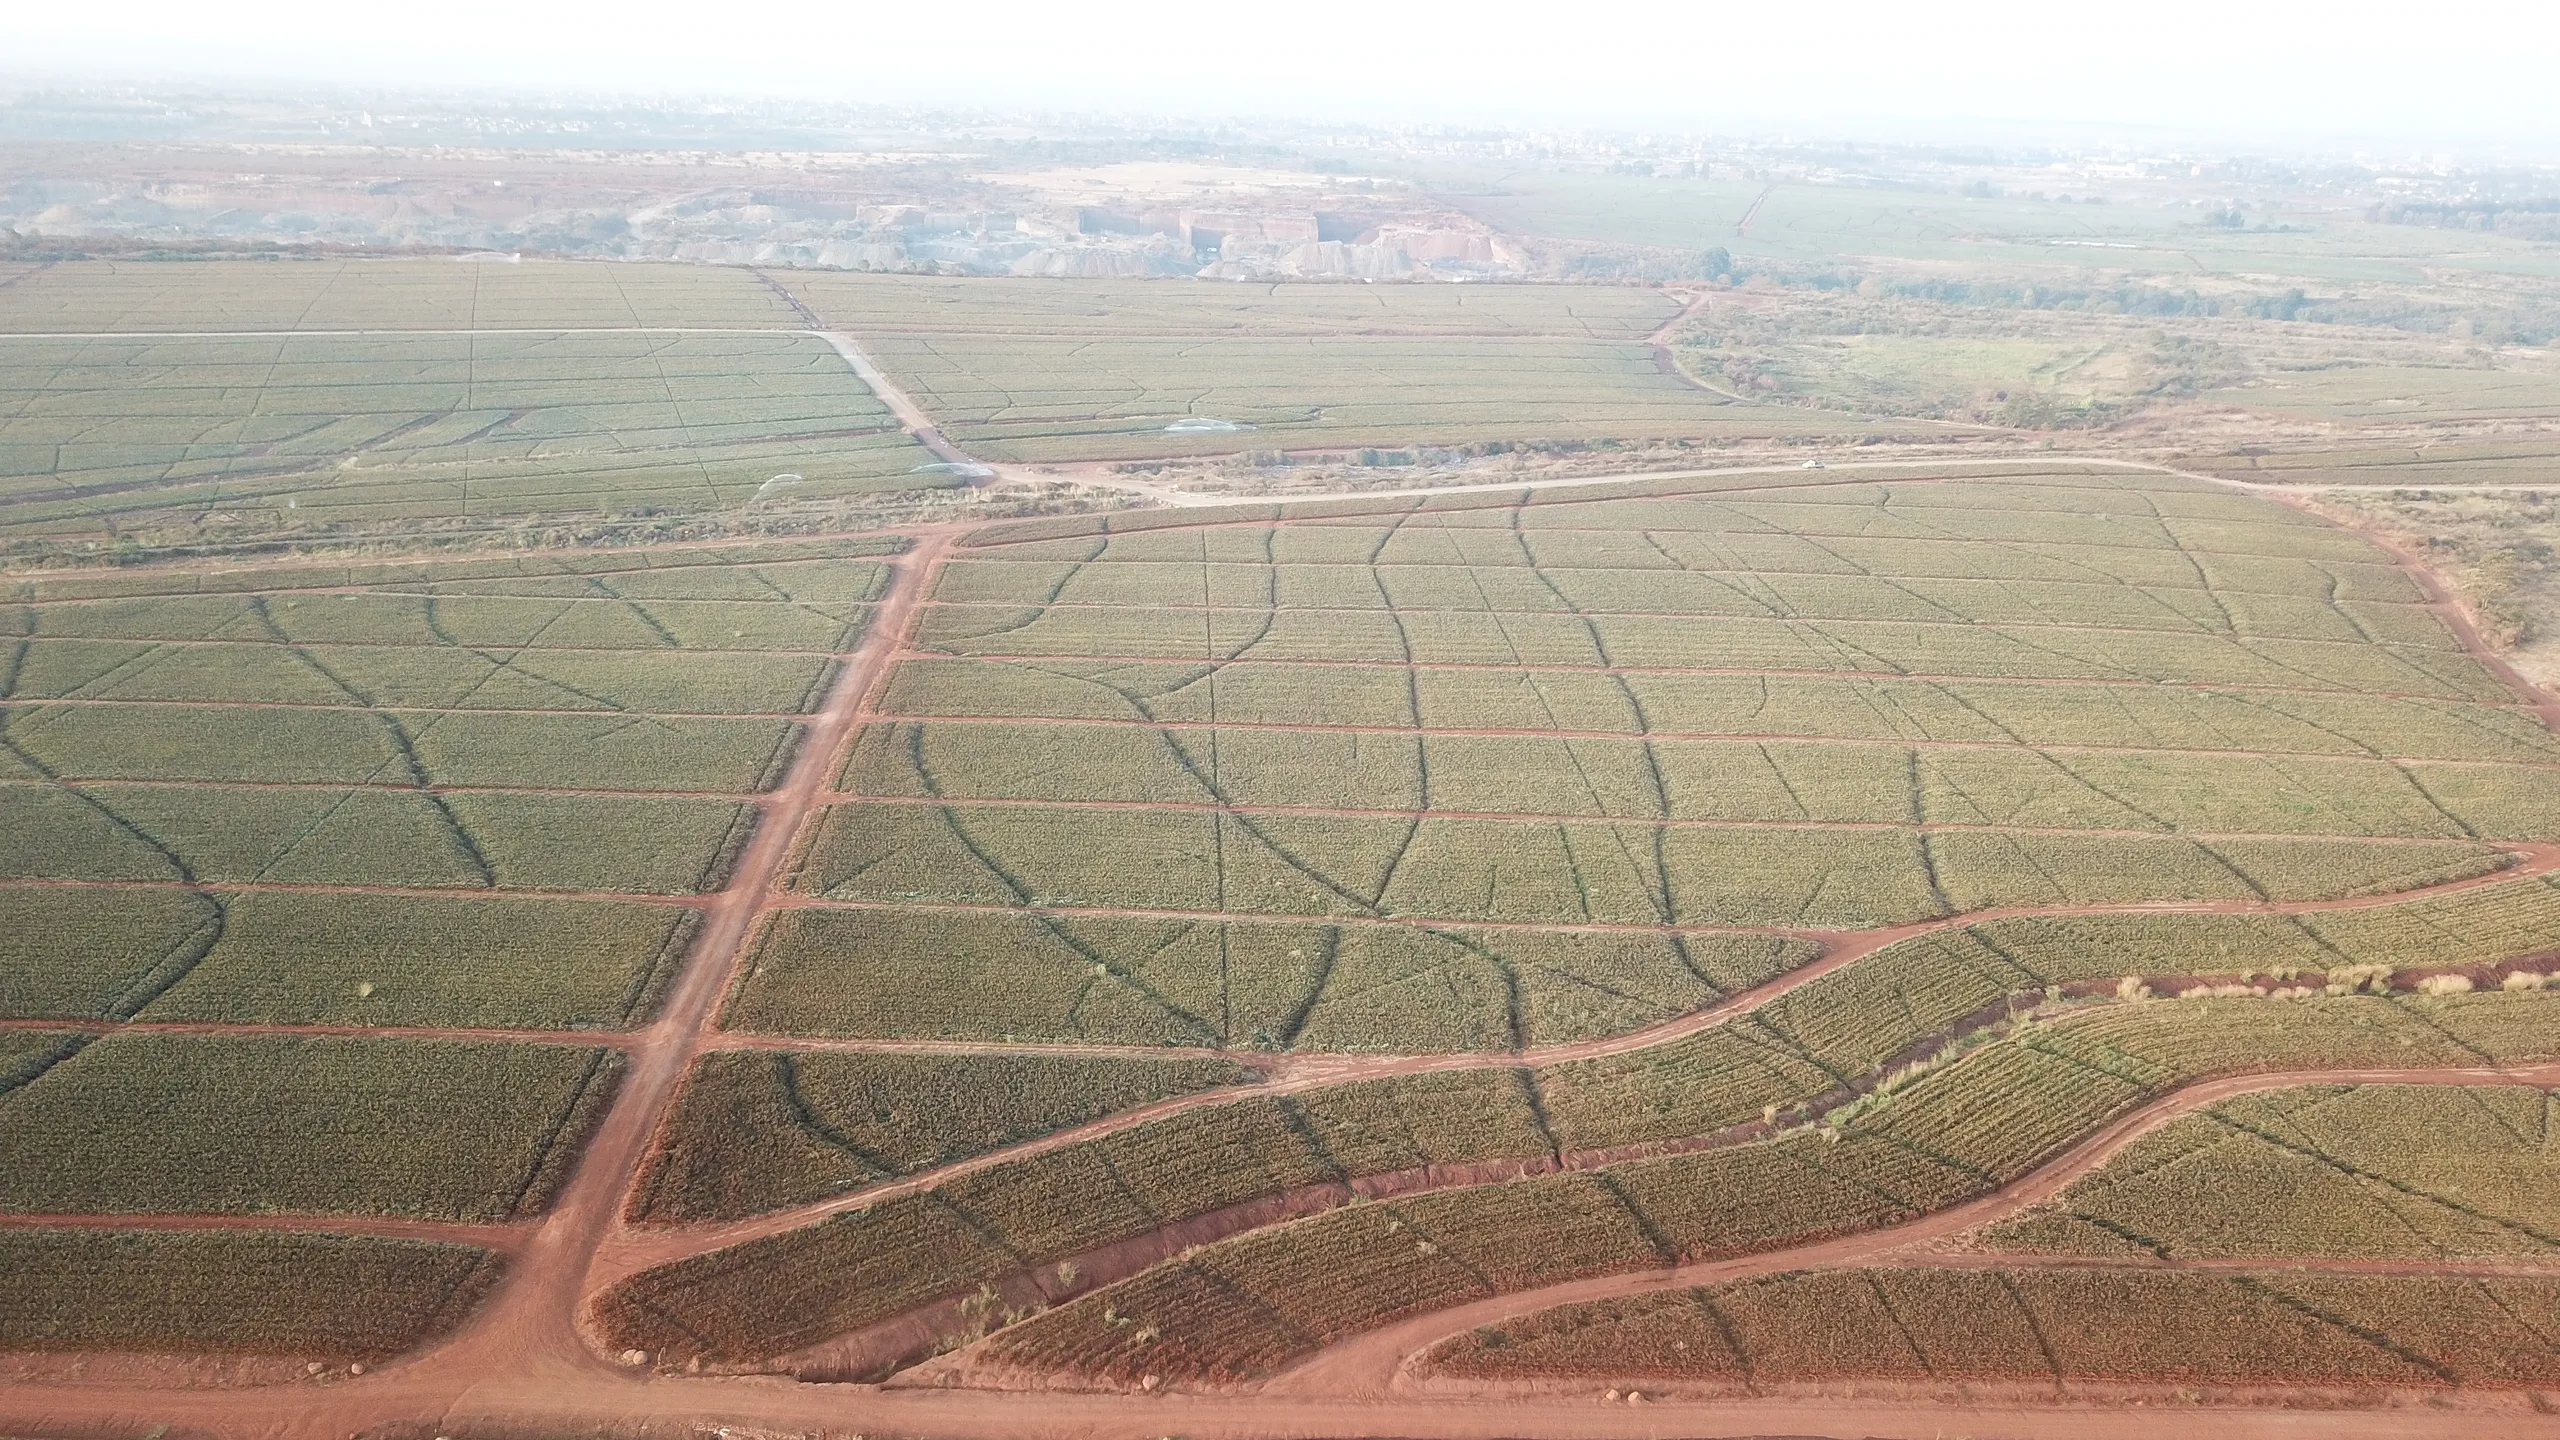 Del Monte's enormous pineapple farm covers 80 sq km of land in central KenyaEdwin Okoth for TBIJ